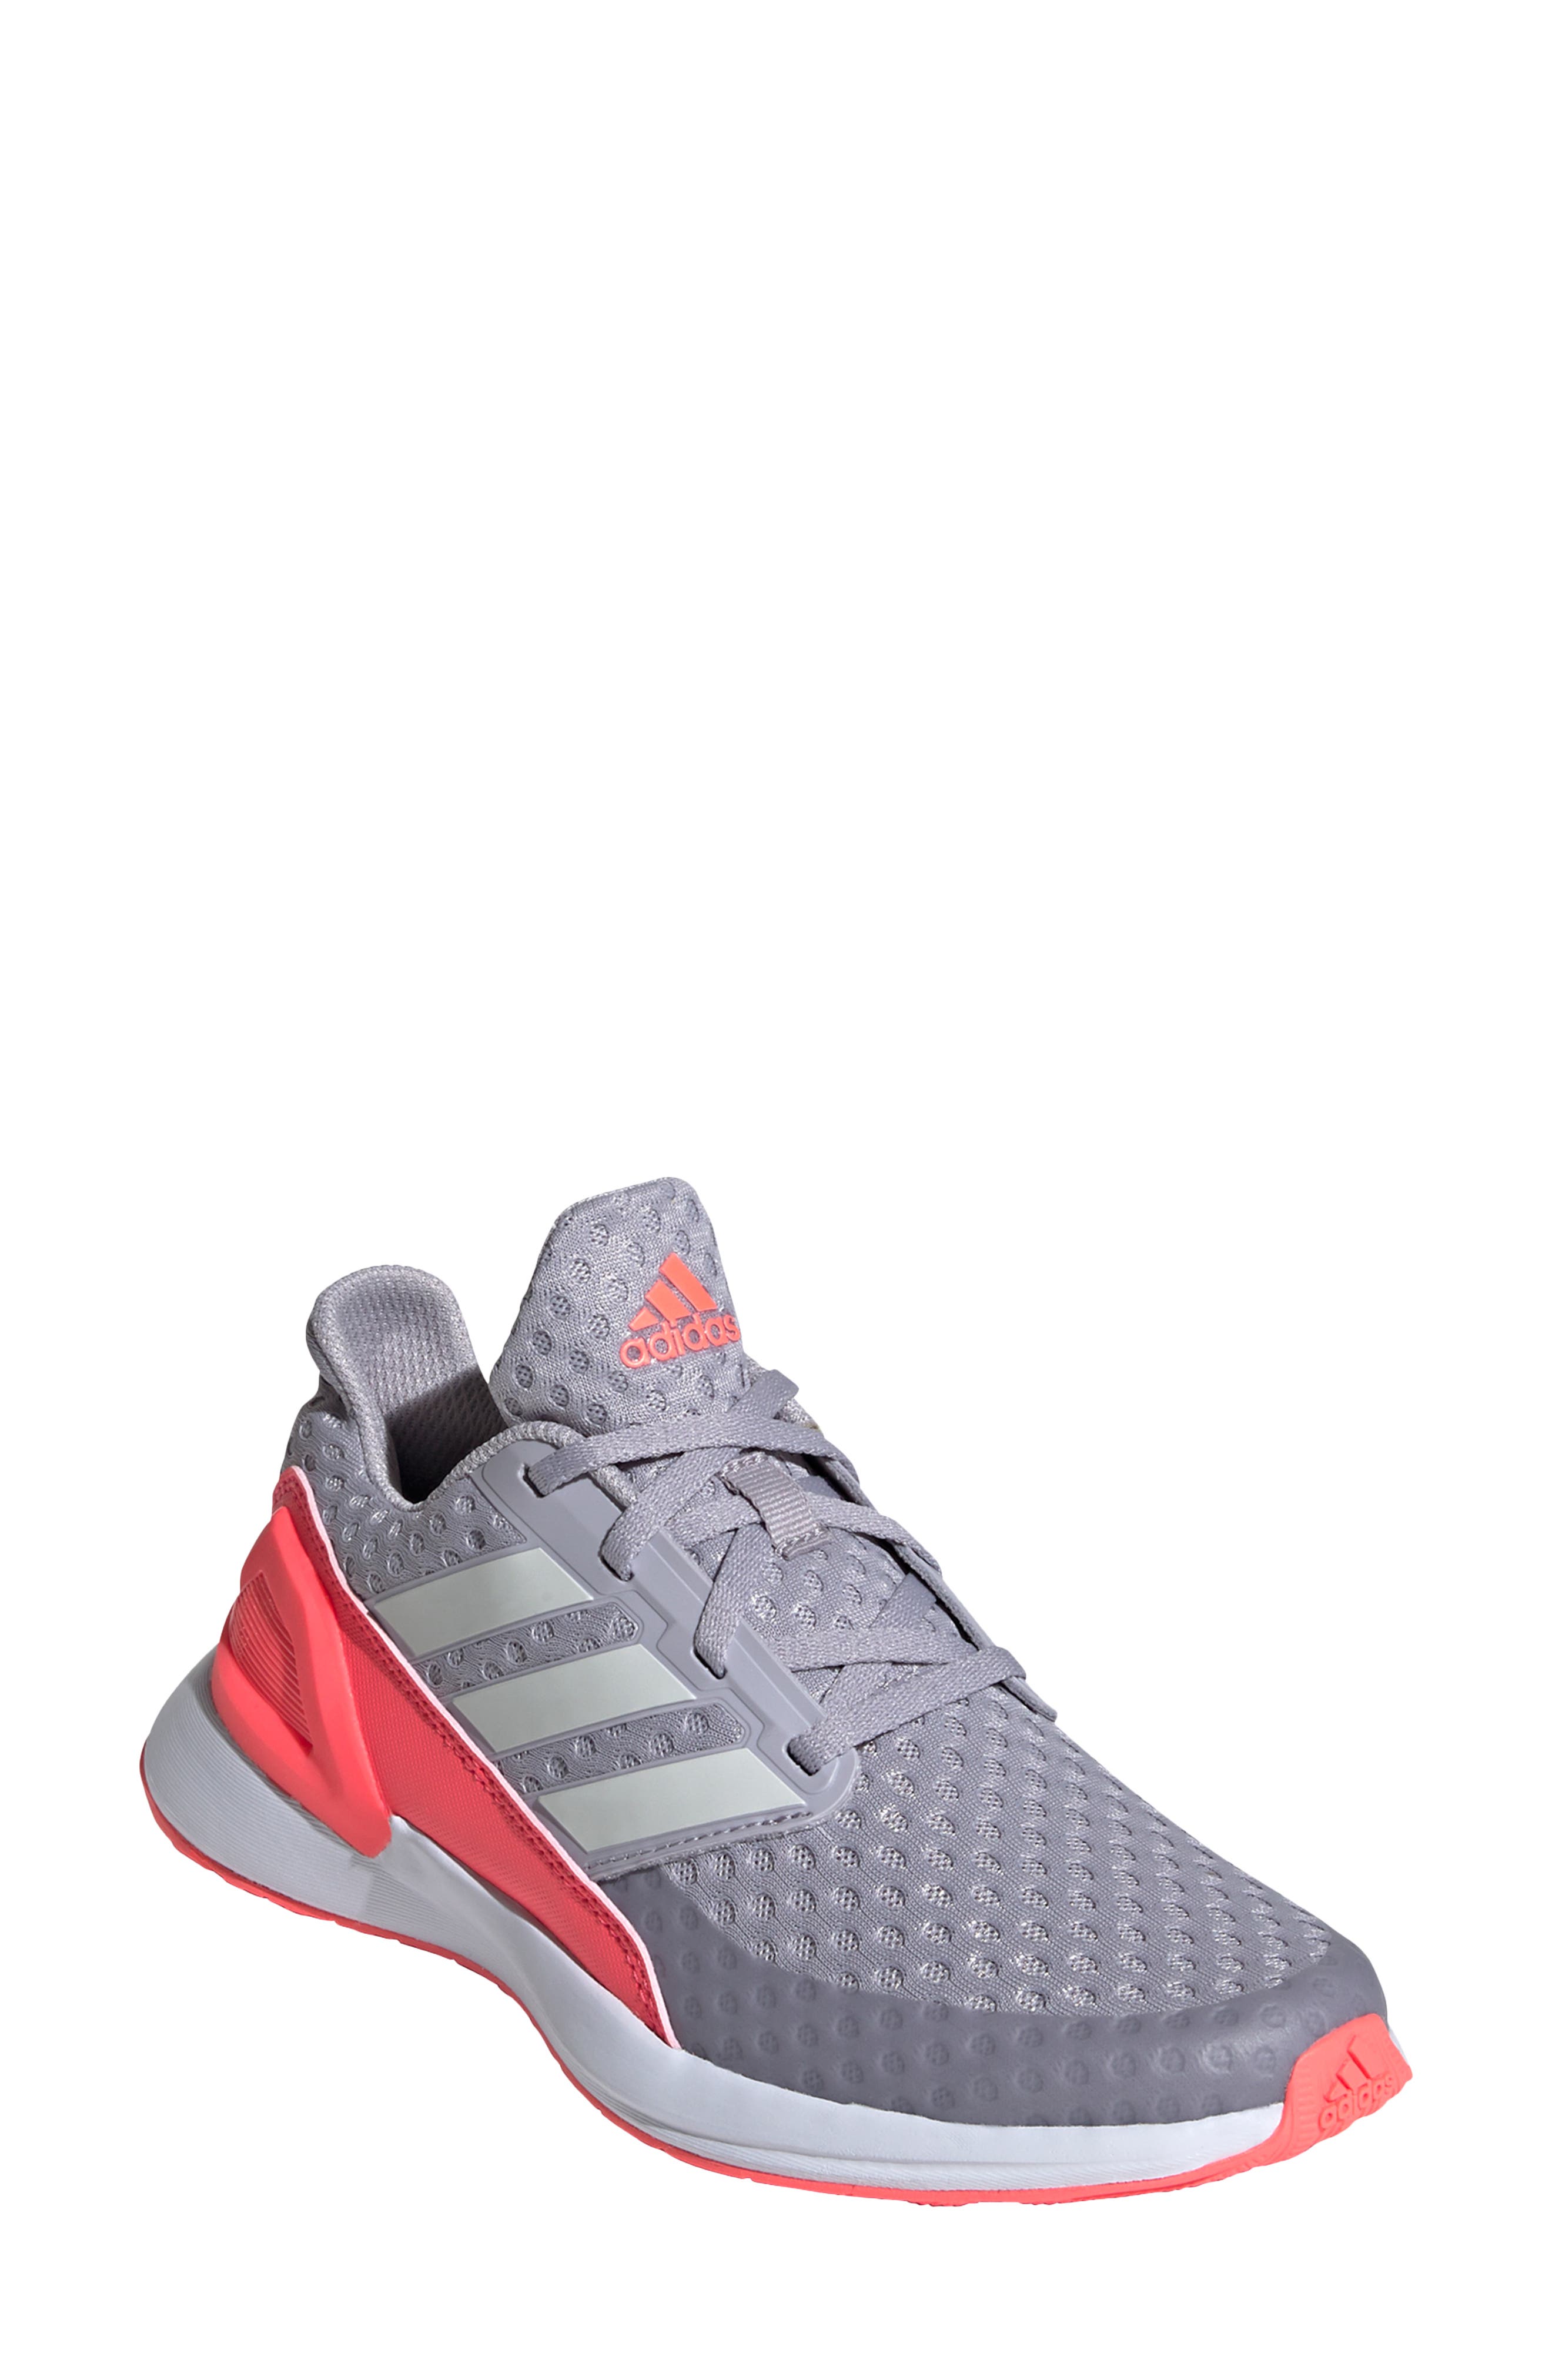 adidas shoes for girls with price